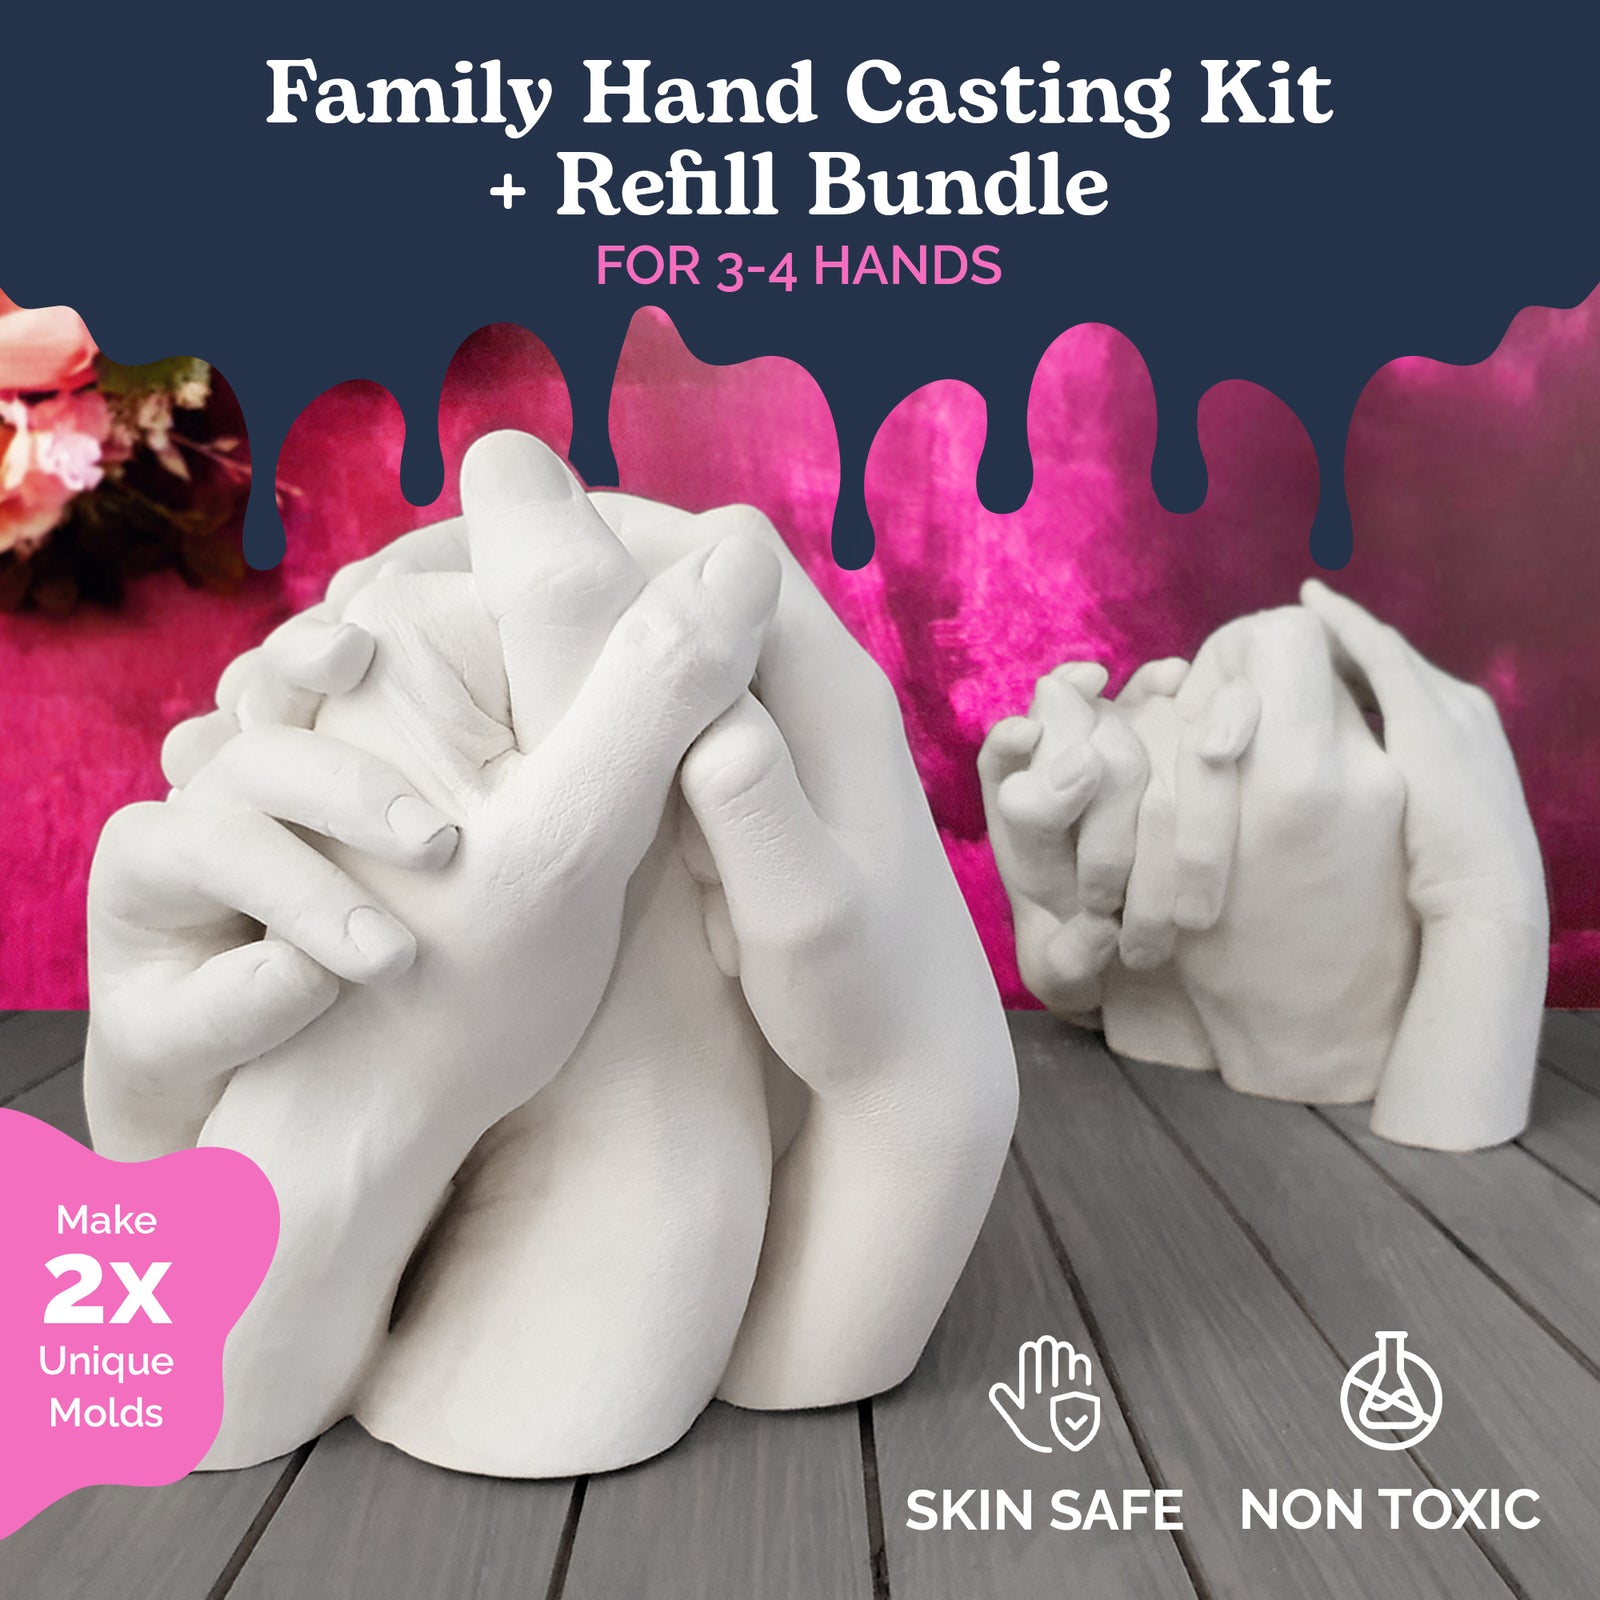 Hand Casting for Adults & Kids Tickets, King of Prussia